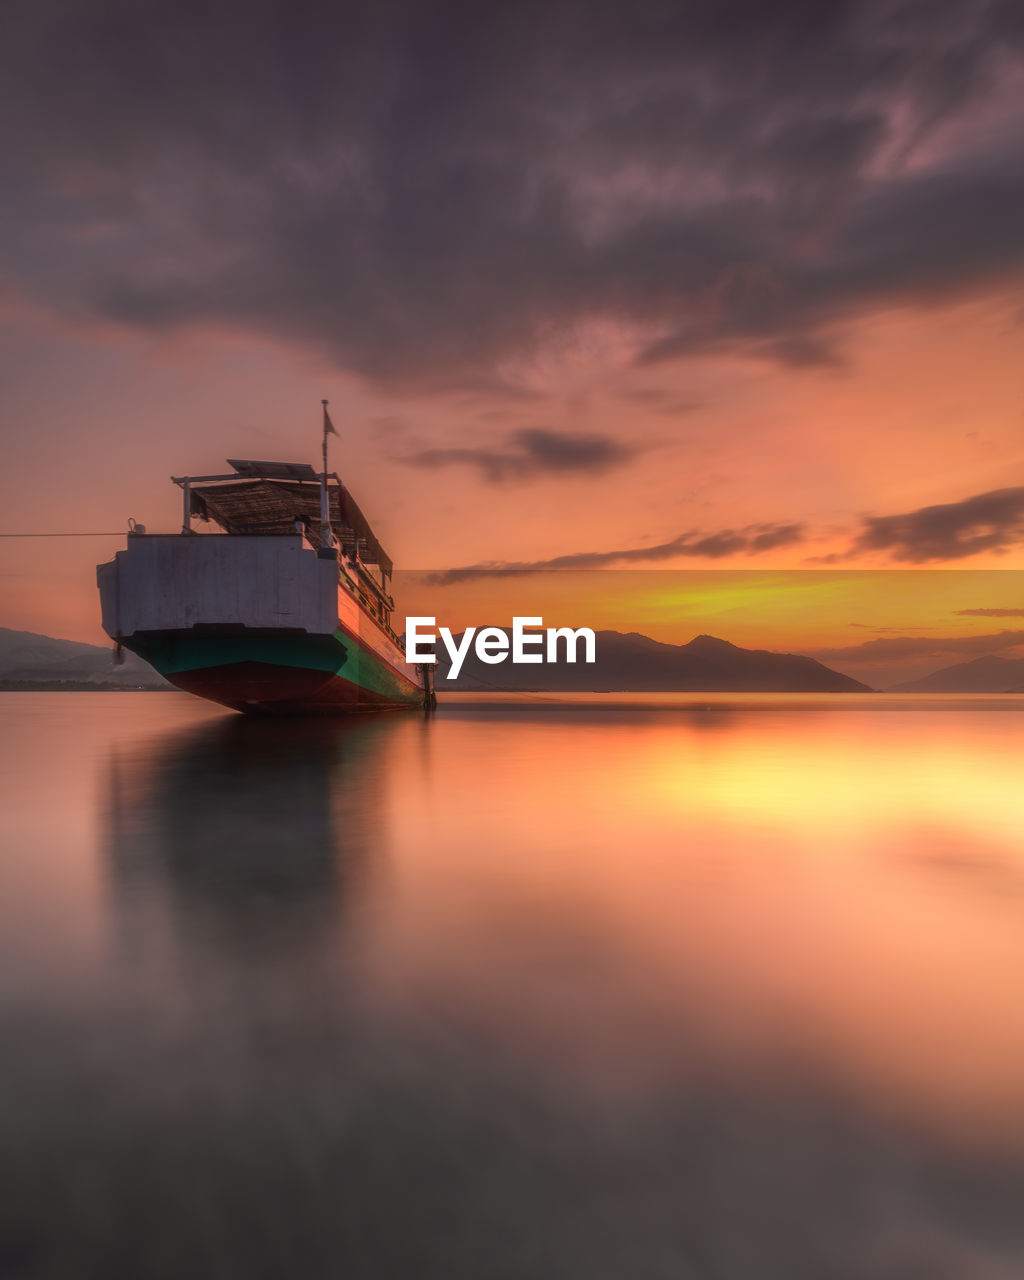 The color of the sunset is so beautiful that the boat is docked